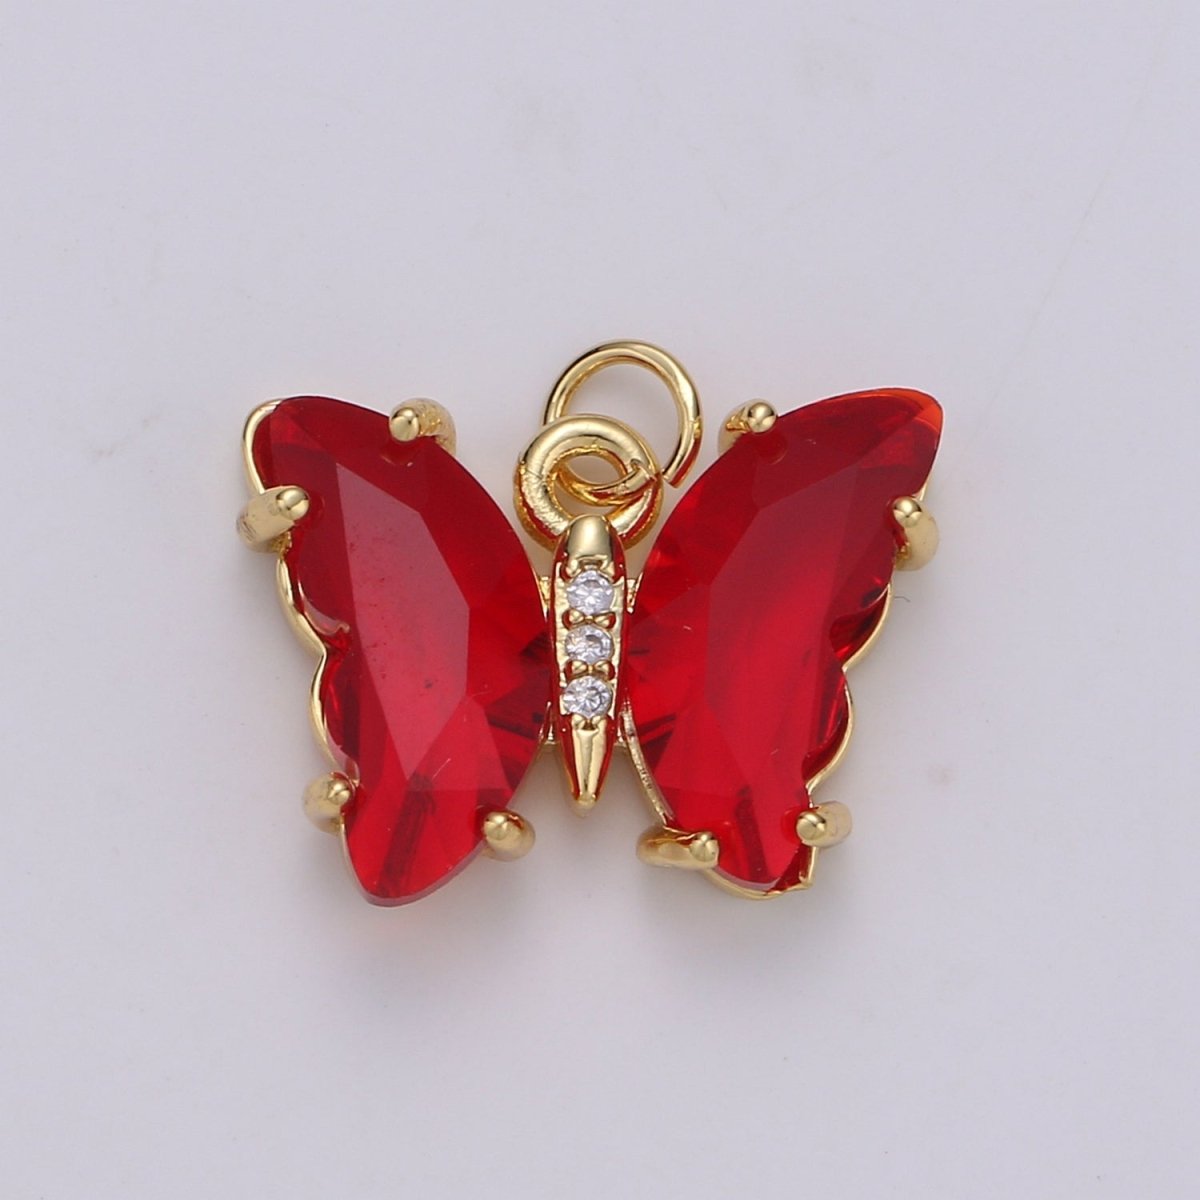 Clear Mariposa Butterfly Charm Acrylic Butterfly Charm Glass Pendant for Necklace Earring Bracelet Component in 24k Gold Filled Tarnish Free D-820 - DLUXCA